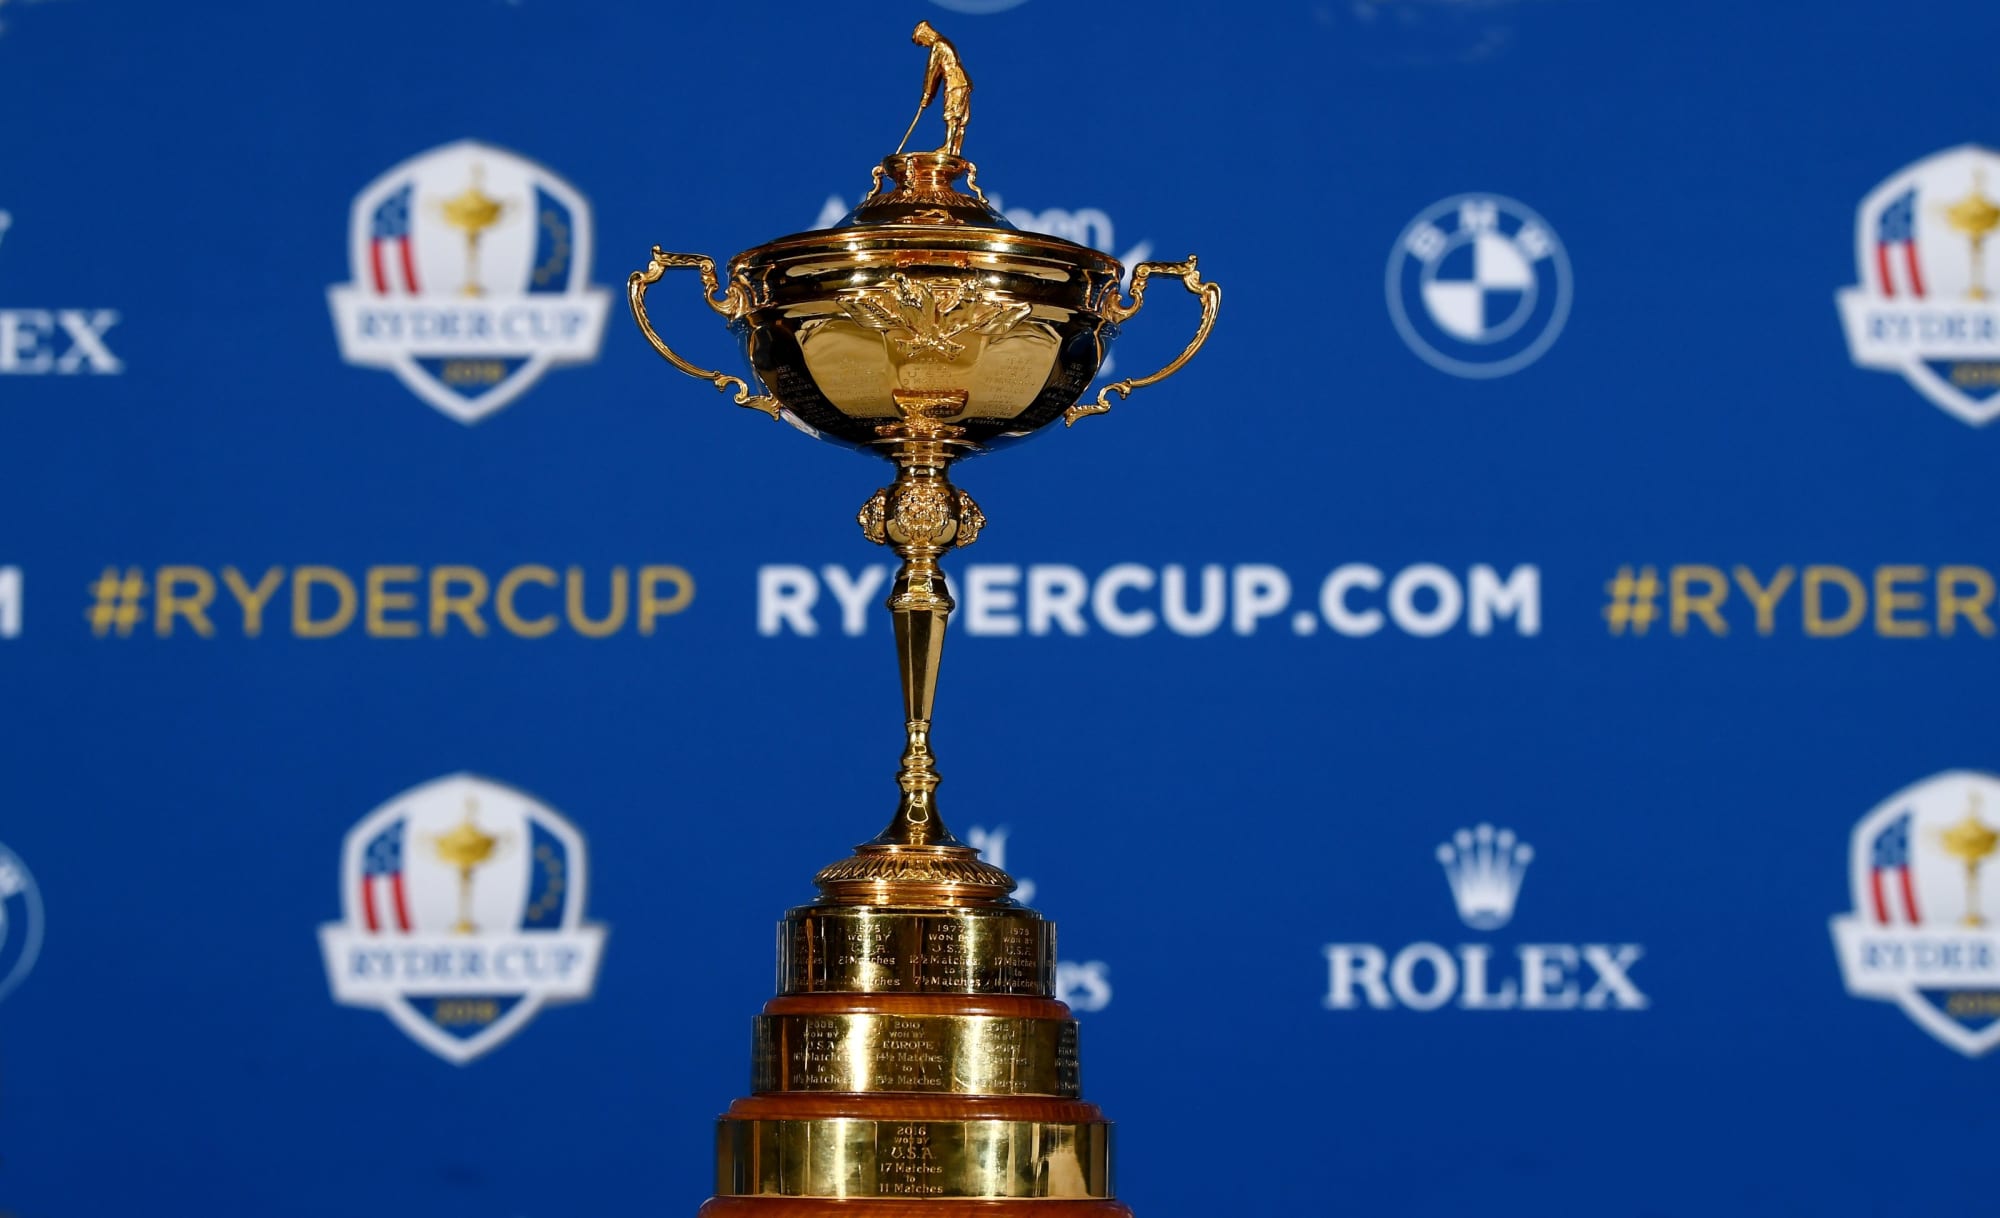 Alltime best US Ryder Cup Team based on playing record